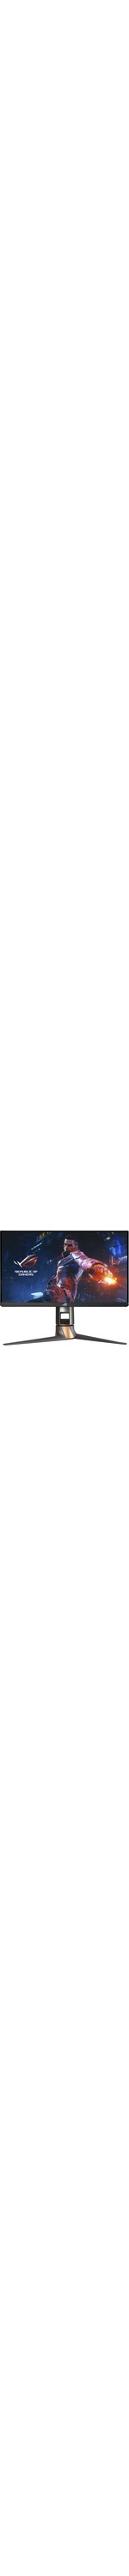 Asus ROG Swift PG259QNR 24.5And#34; Full HD WLED 240hz Gaming LCD Monitor - 16:9 - Black, Silver